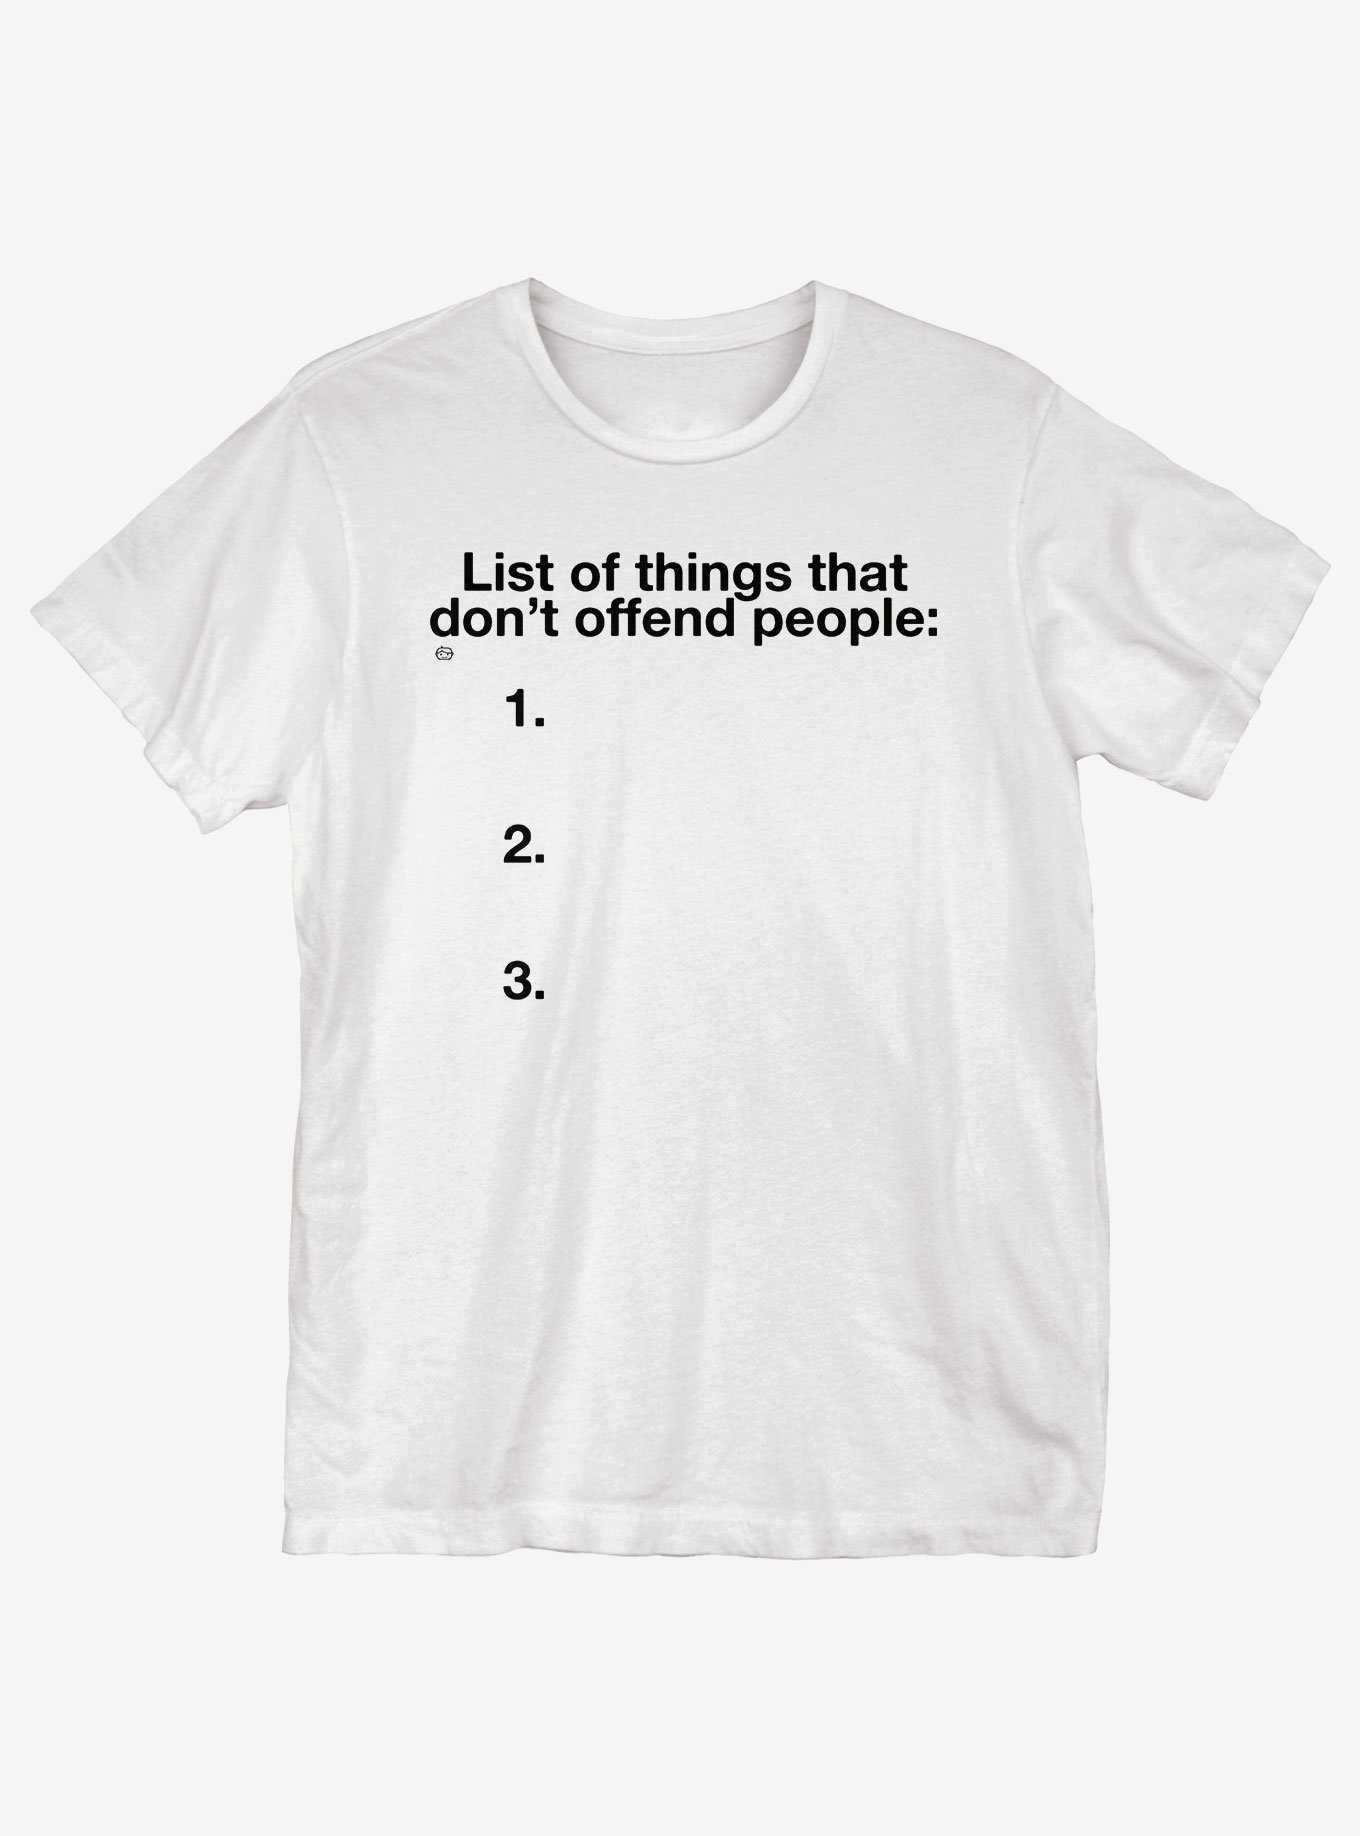 List Of Things That Don't Offend T-Shirt, , hi-res